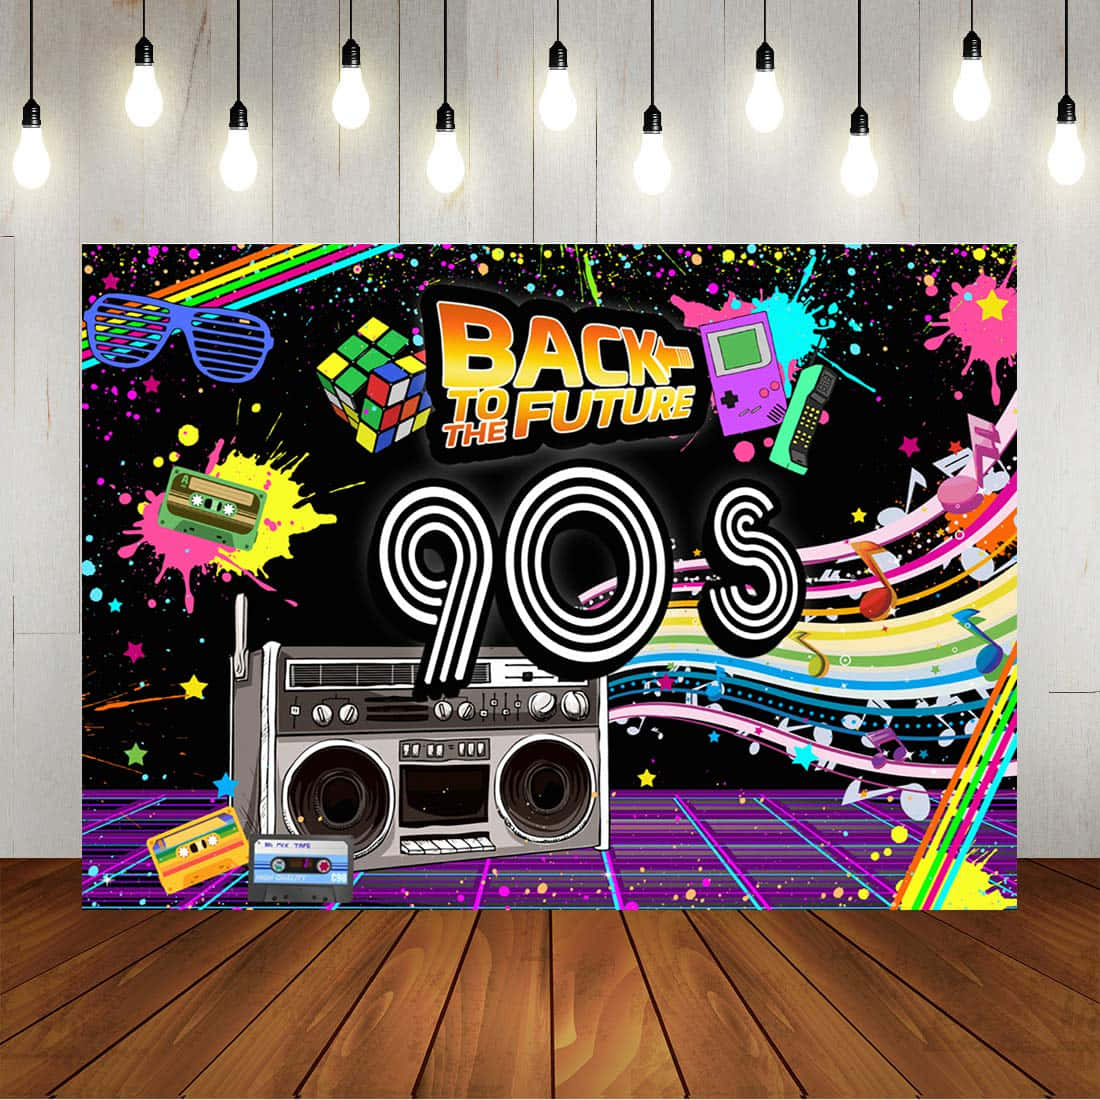 Celebrate the 90s with this upbeat, nostalgic background